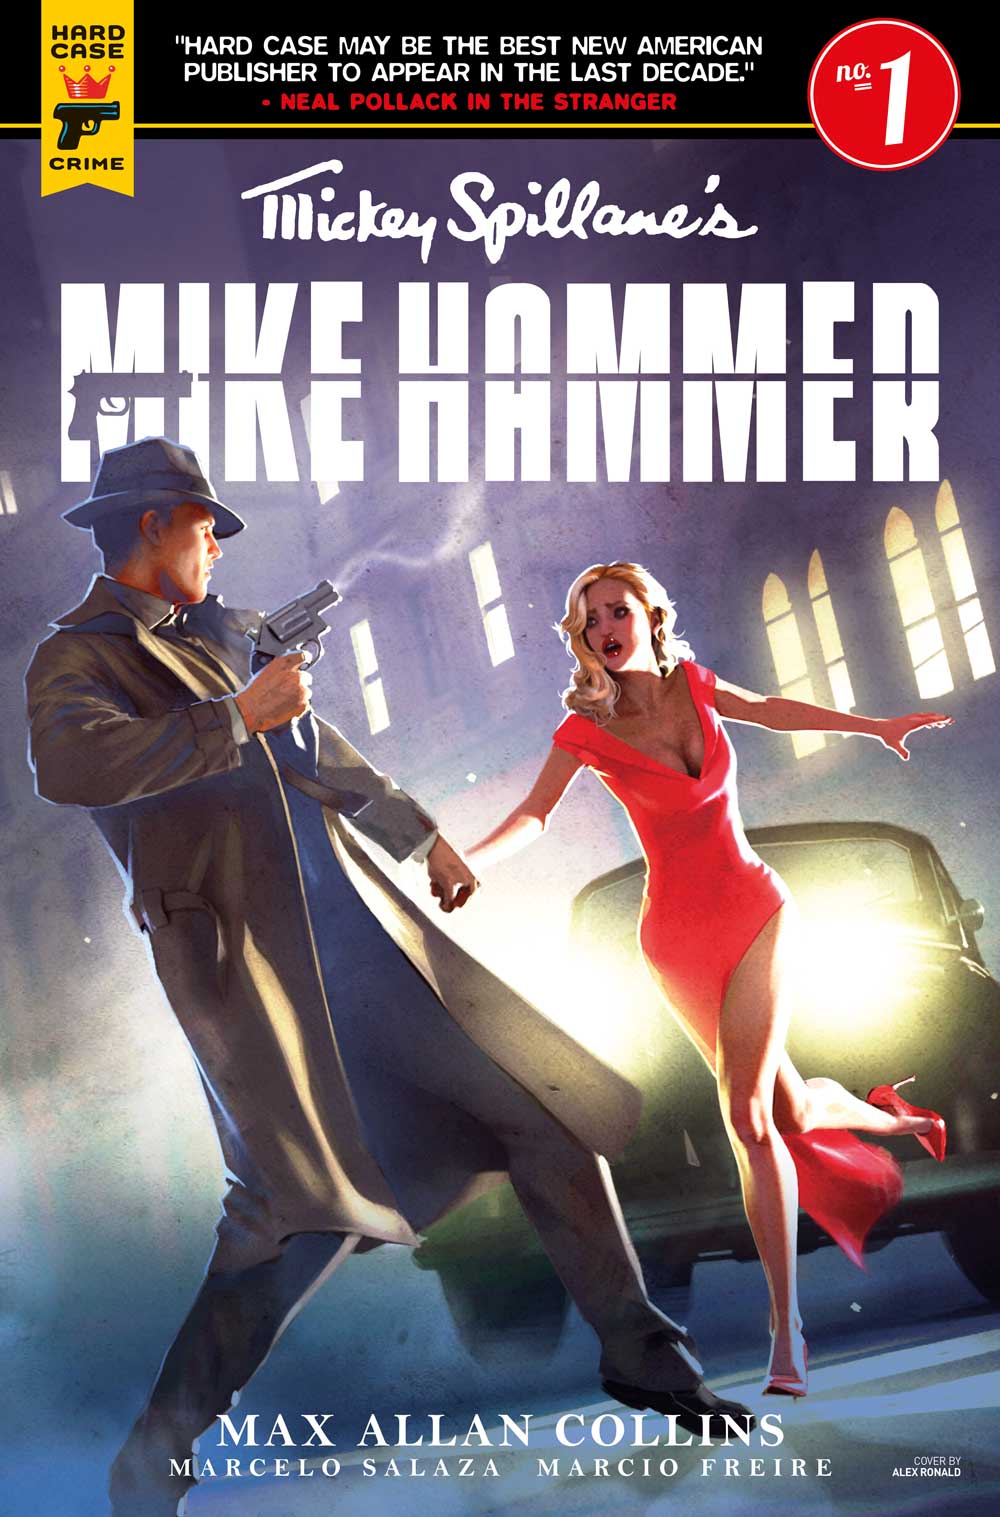 MikeHammer_CoverB